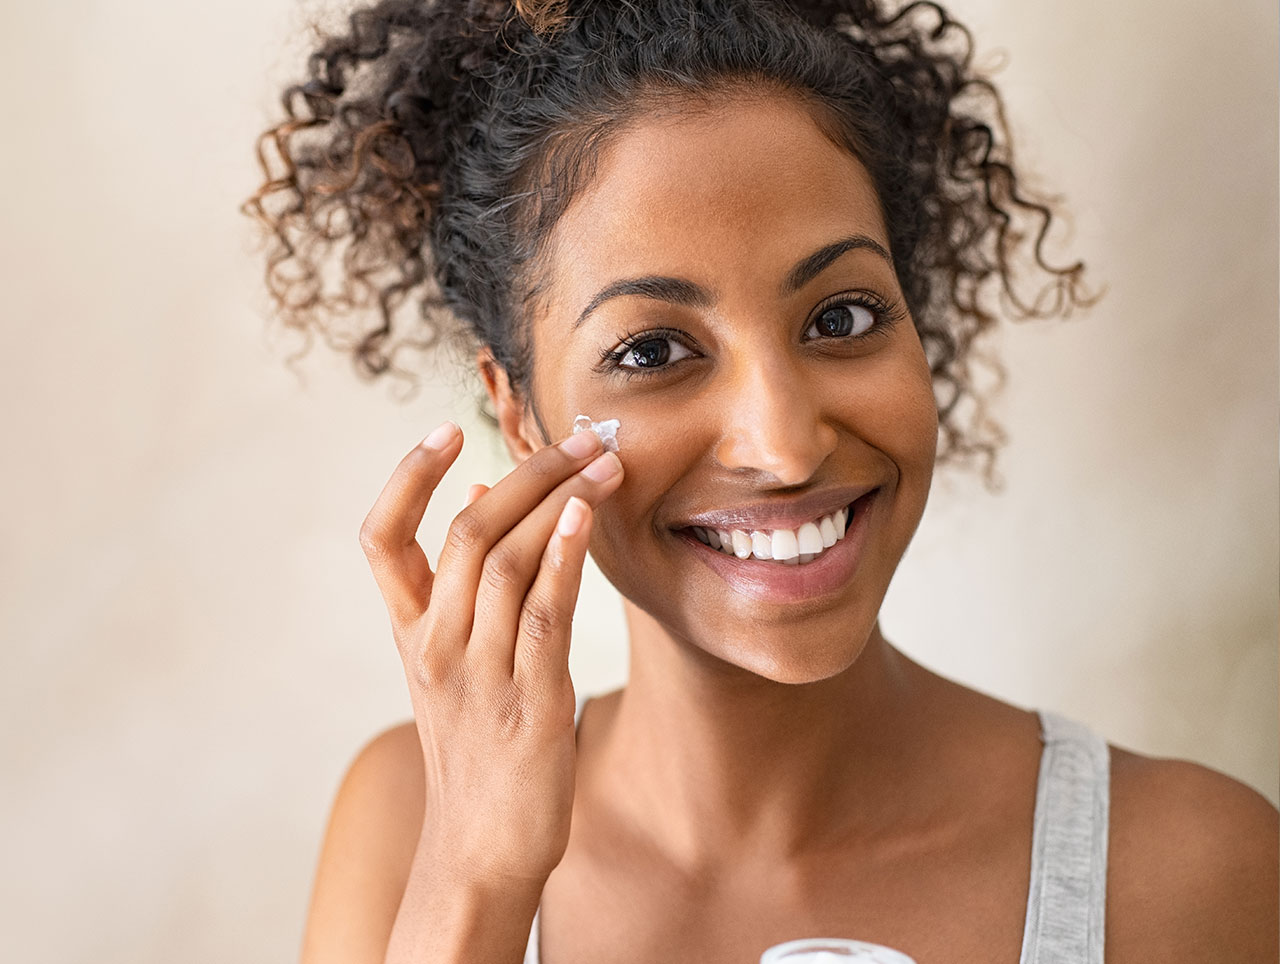 Young woman with youthful skin doing a skincare routine.